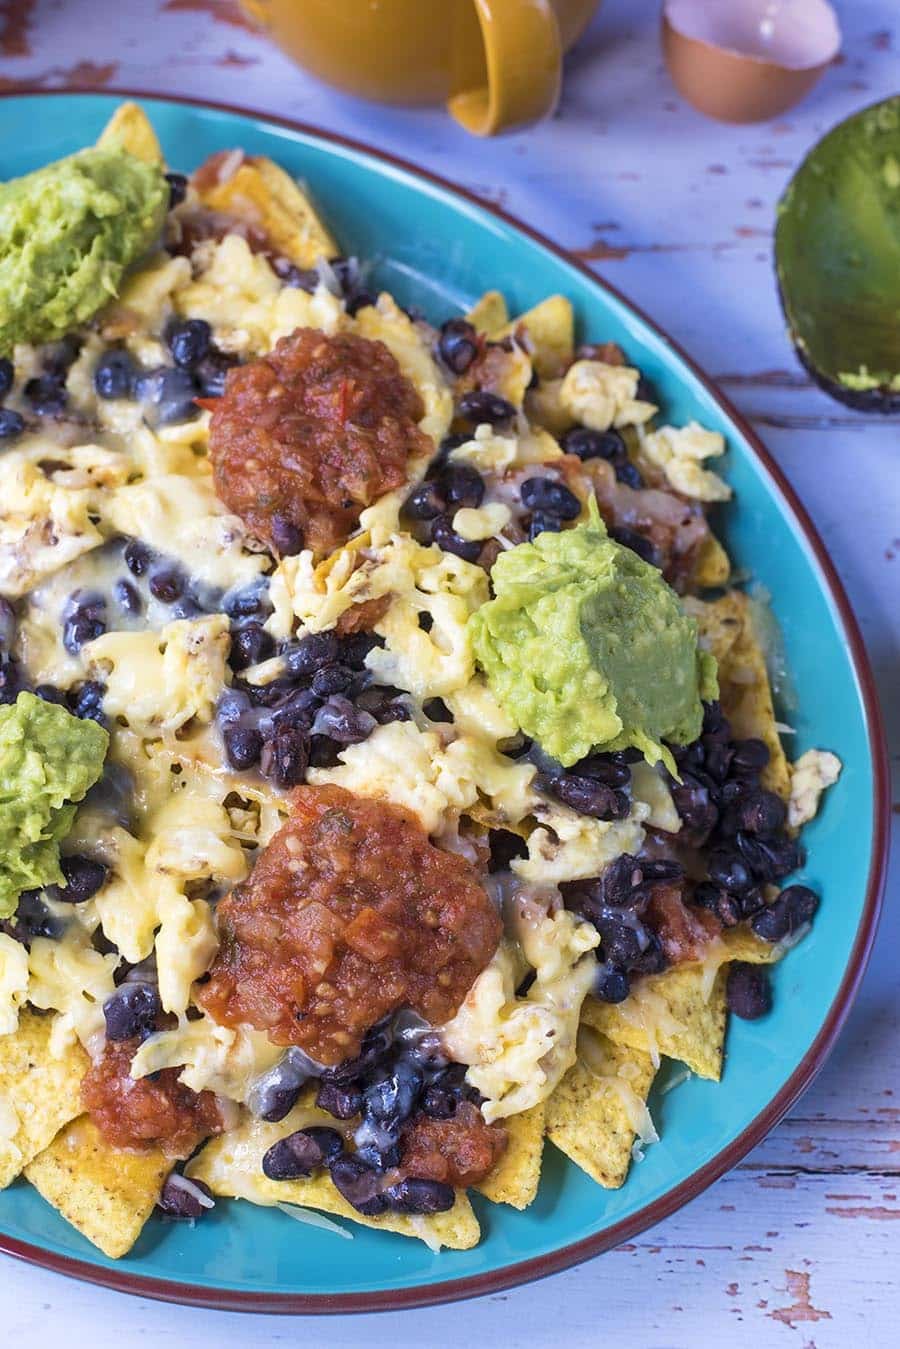 Nachos covered in black beans, salsa, guacamole and melted cheese.